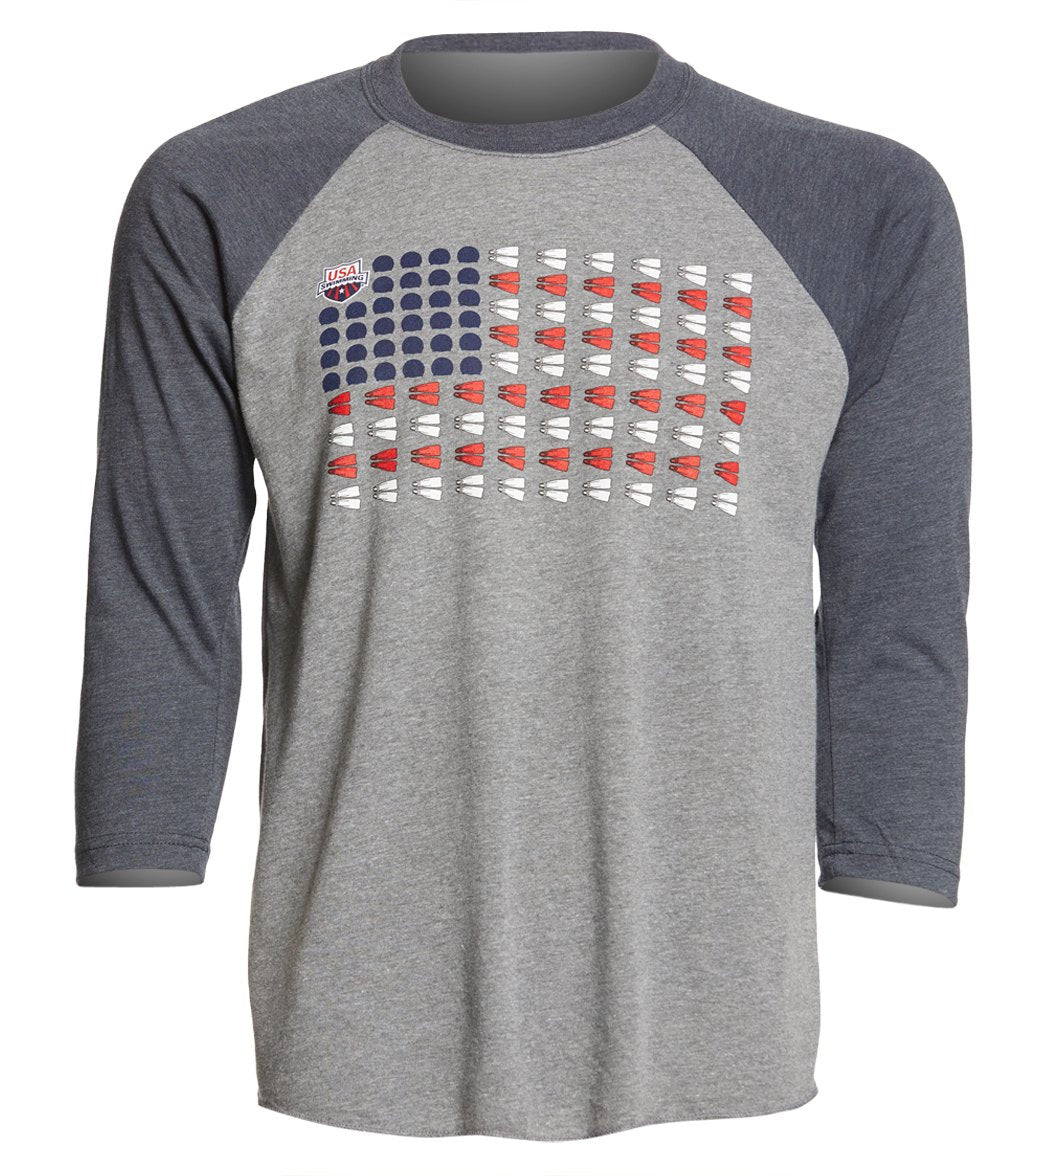 Usa Swimming Men's Caps And Fins Raglan T-Shirt - Vintage Navy/Heather Grey Small Cotton/Polyester/Rayon - Swimoutlet.com